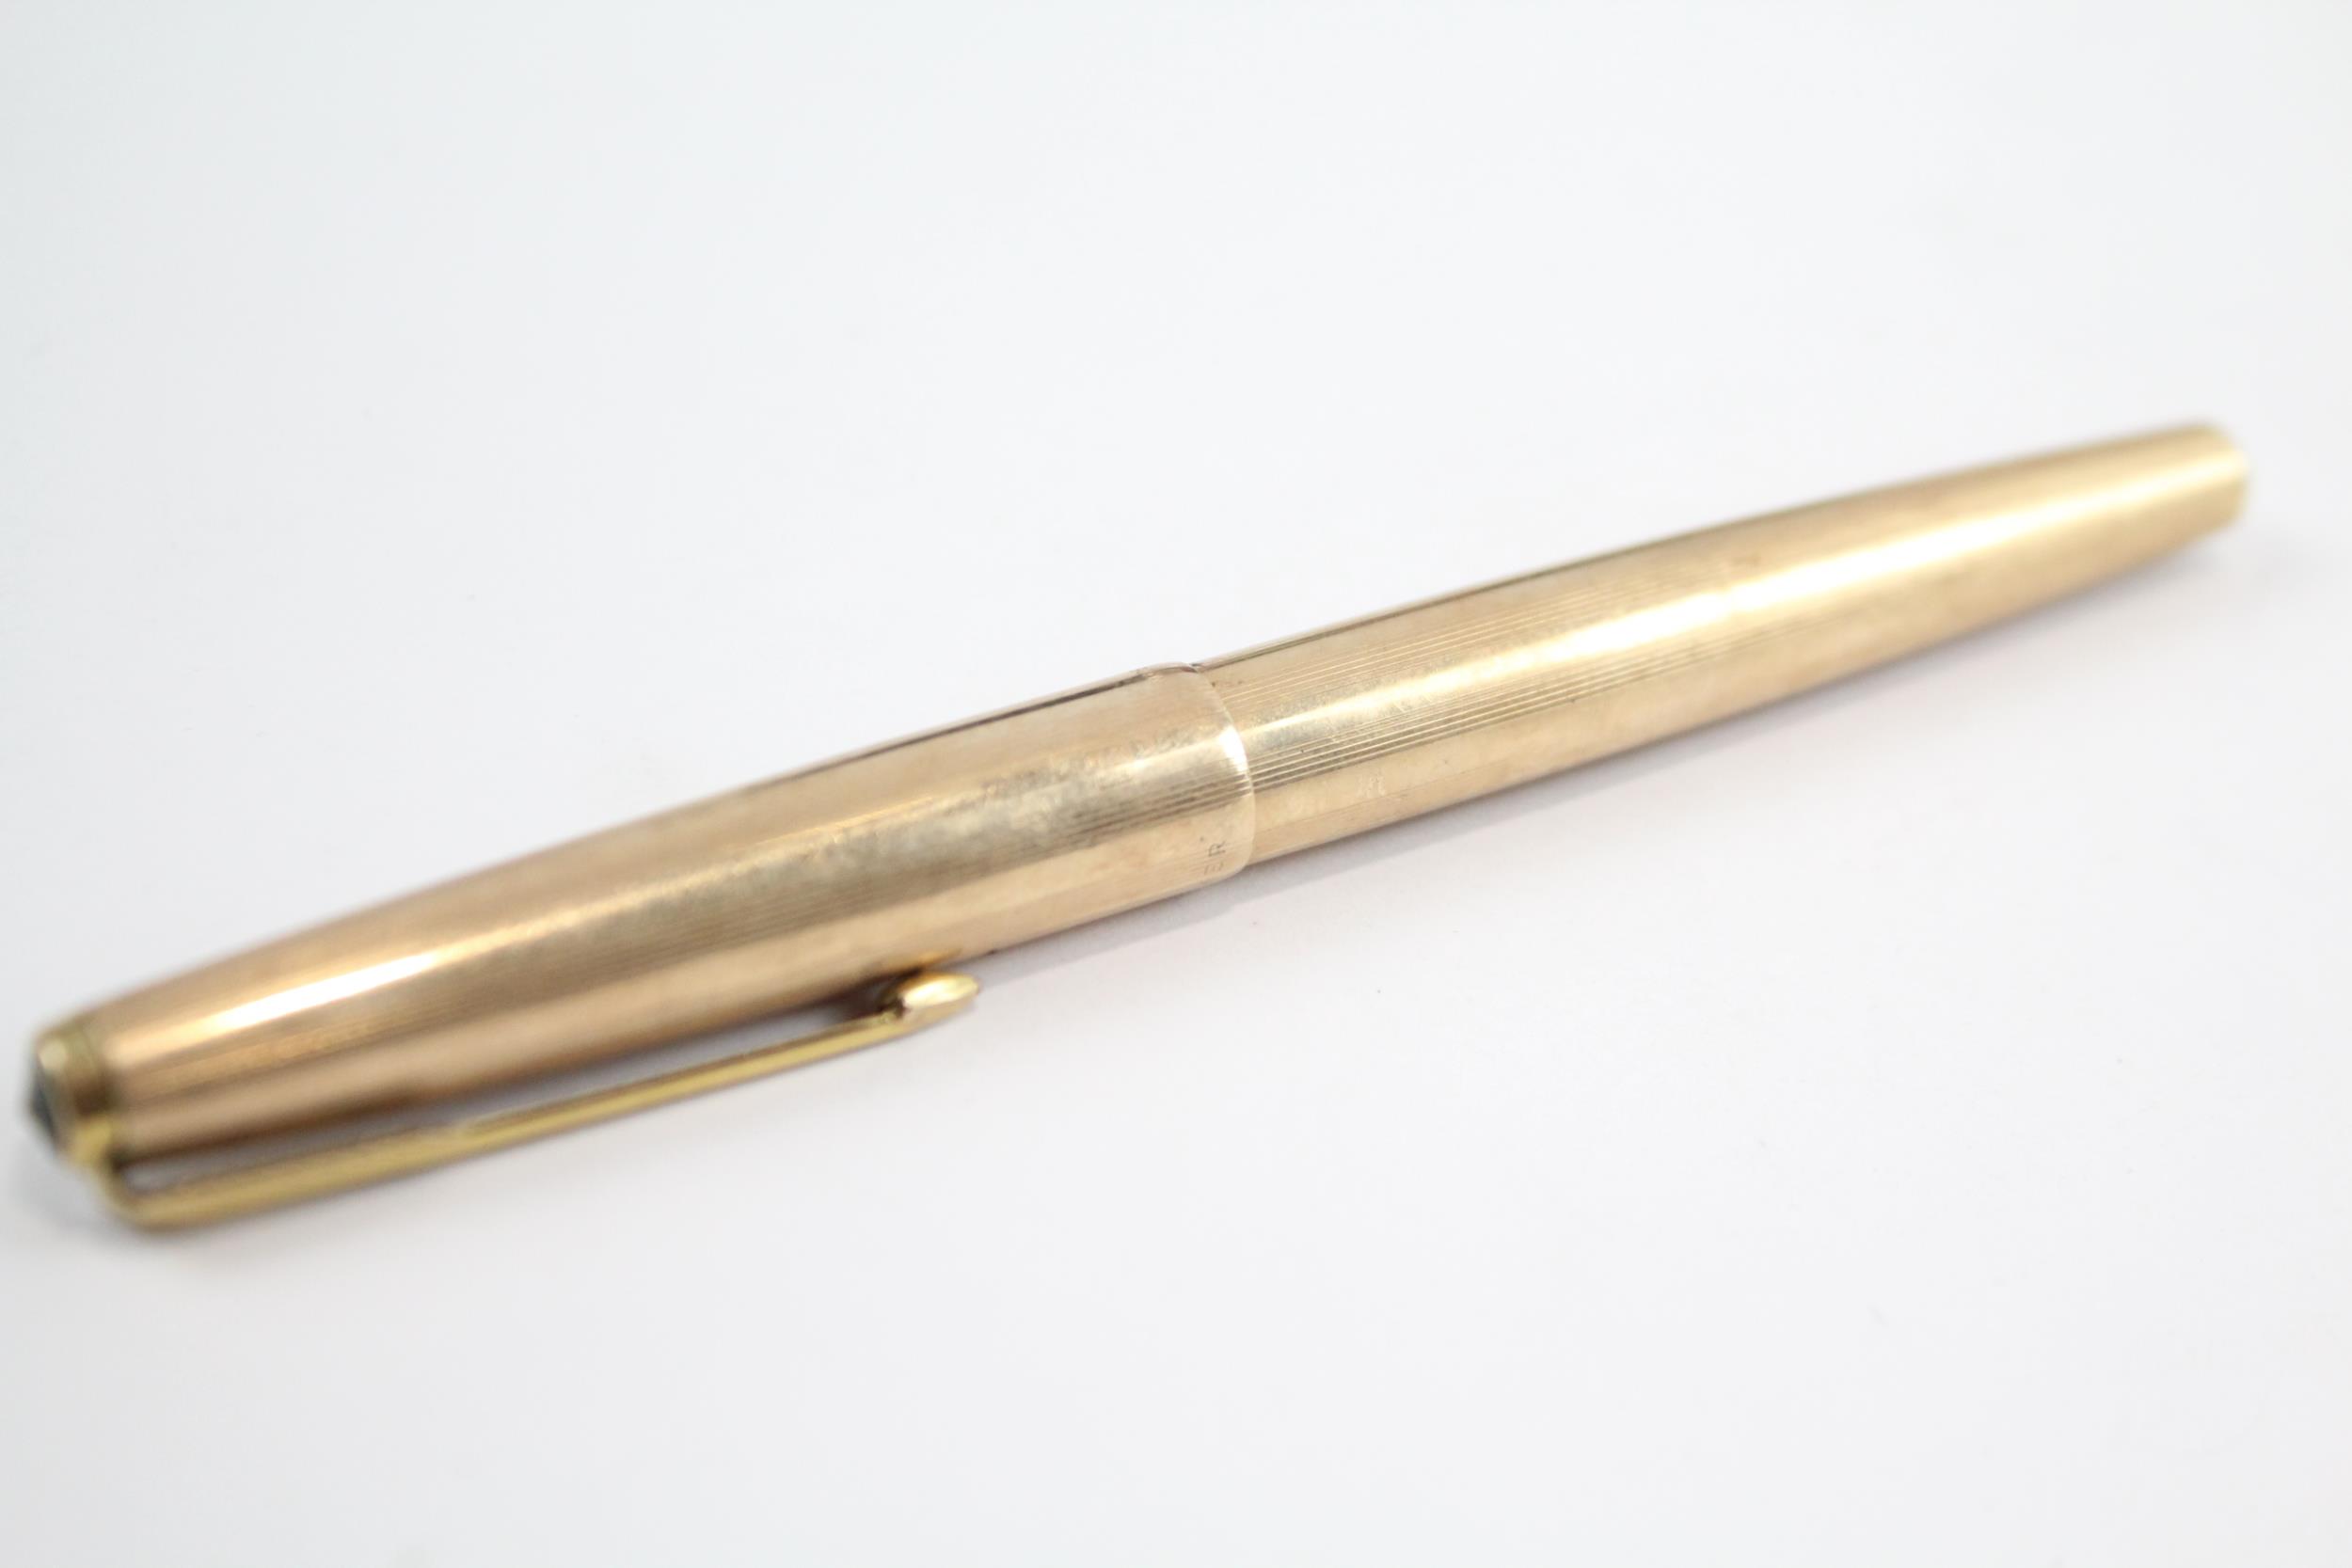 Vintage Parker 61 Gold Plated Fountain Pen w/ 14ct Gold Nib WRITING (23g) // Dip Tested & WRITING In - Image 6 of 6